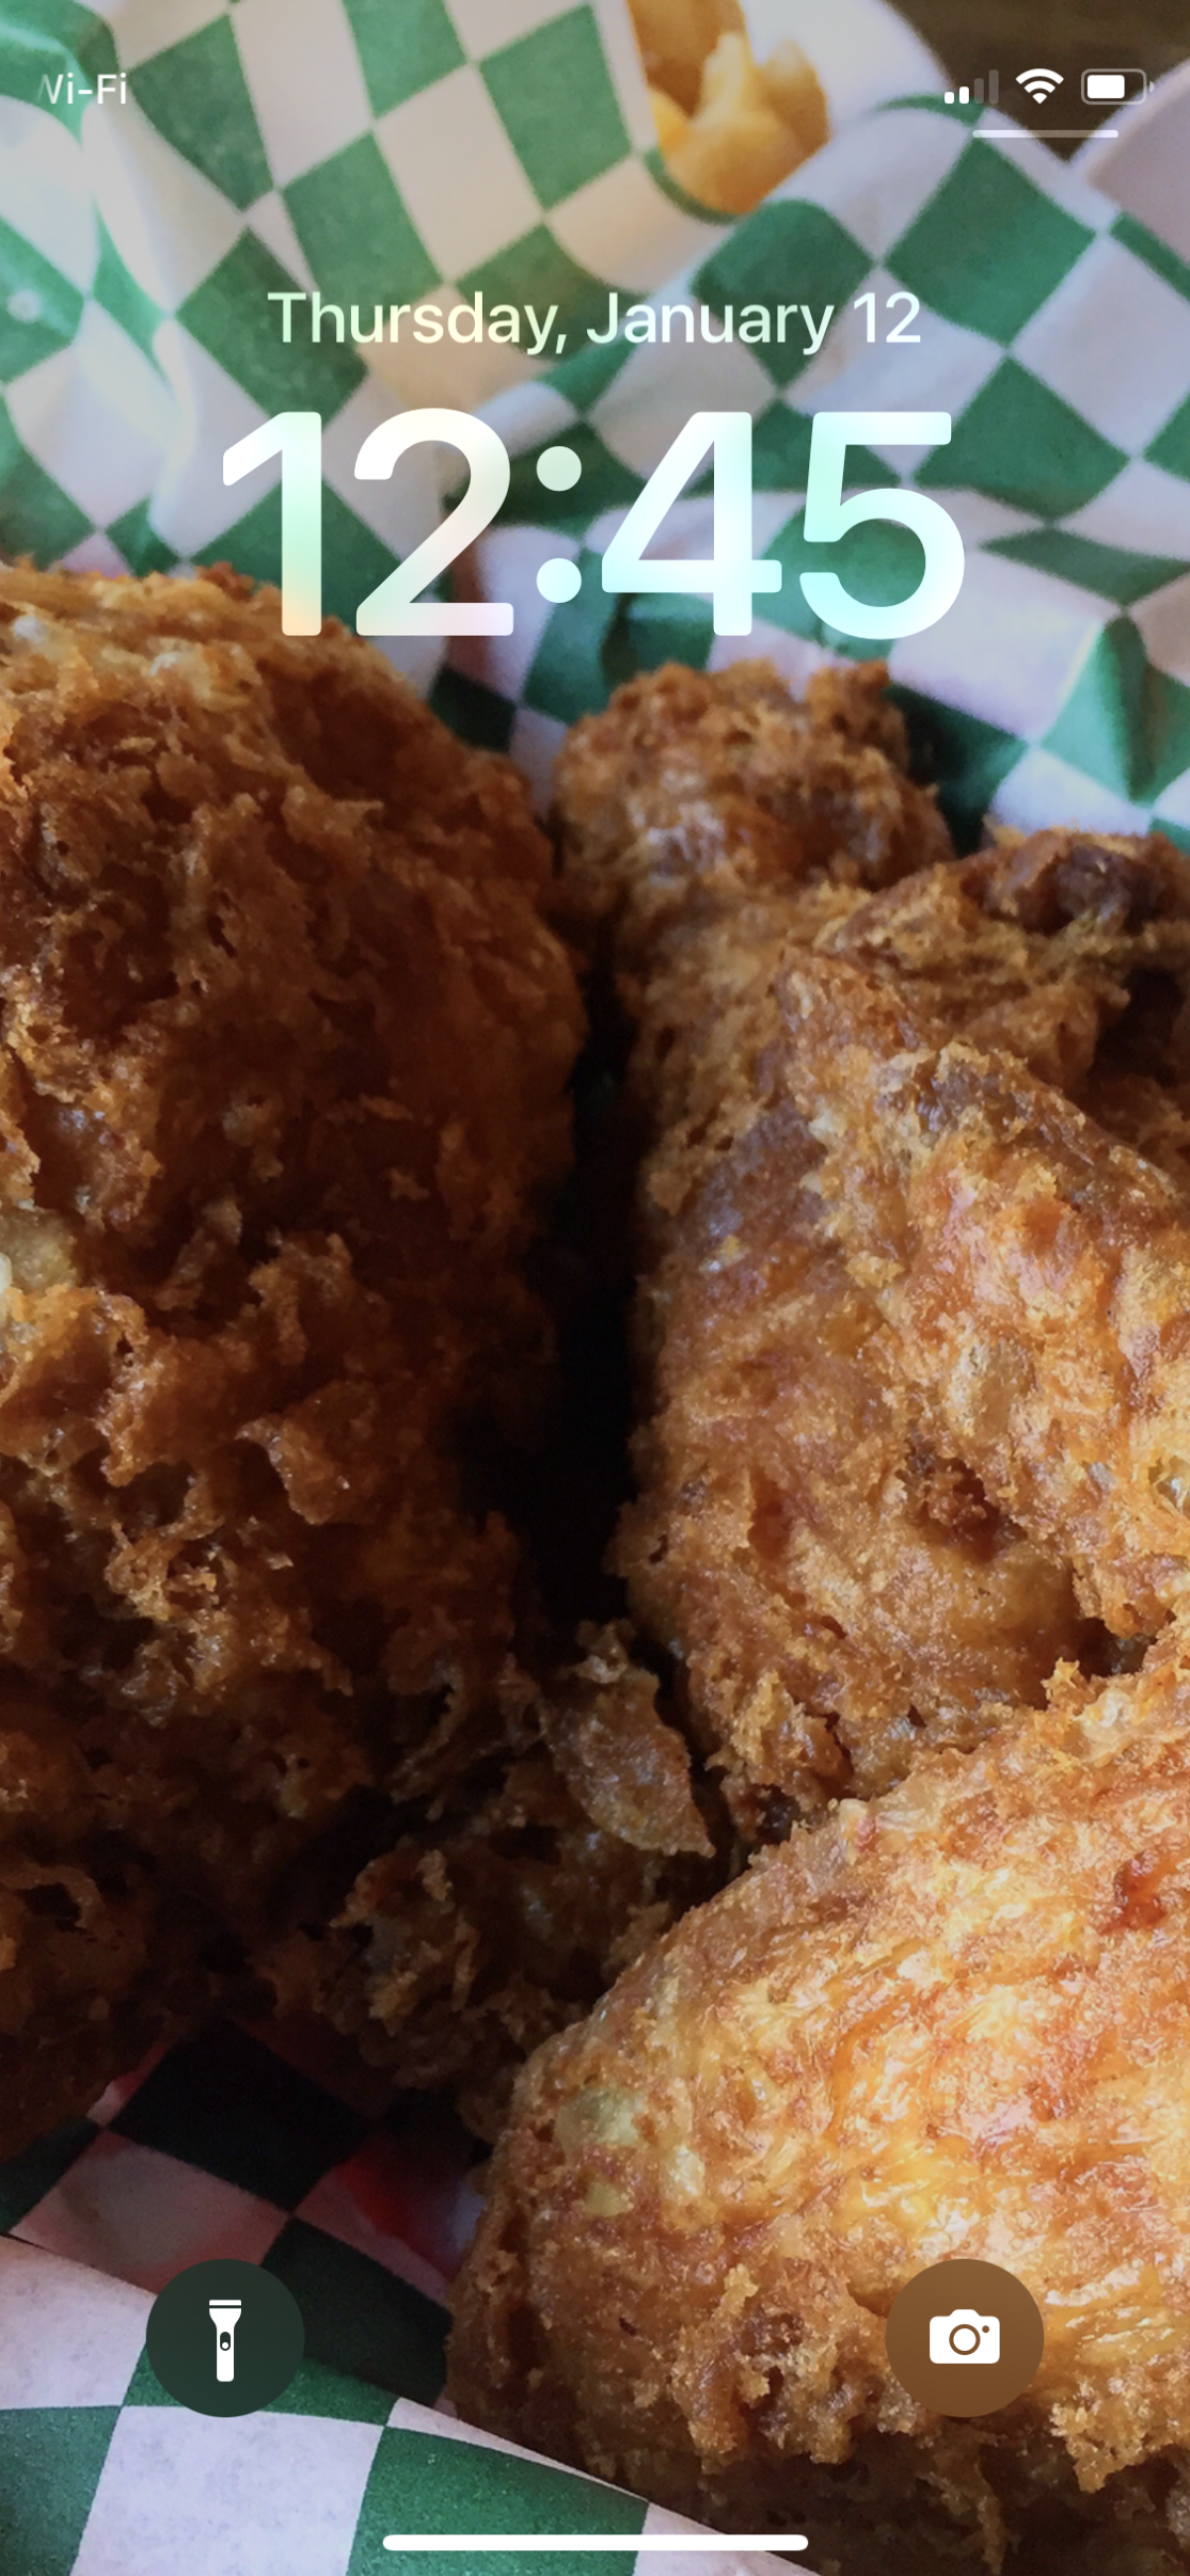 Fried chicken from Willie Mae's in Venice as a phone background